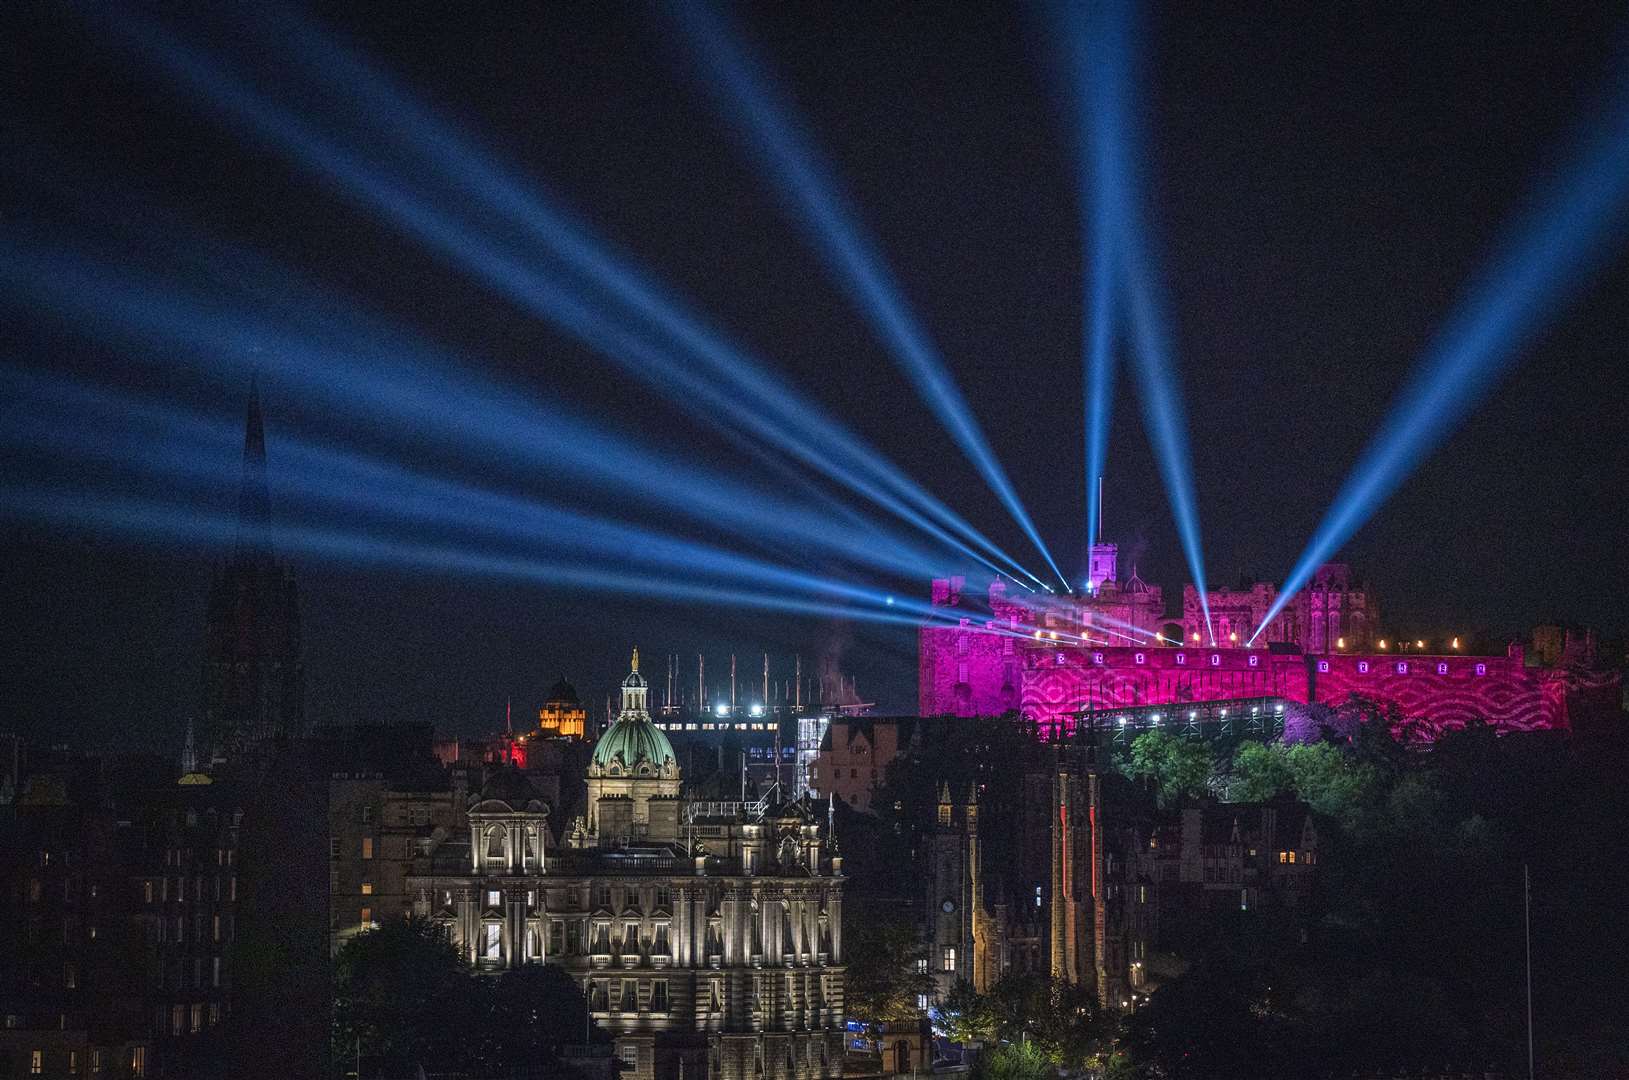 Laser beams and projections lit up Edinburgh Castle during the last night of the Royal Edinburgh Military Tattoo in August (Jane Barlow/PA)